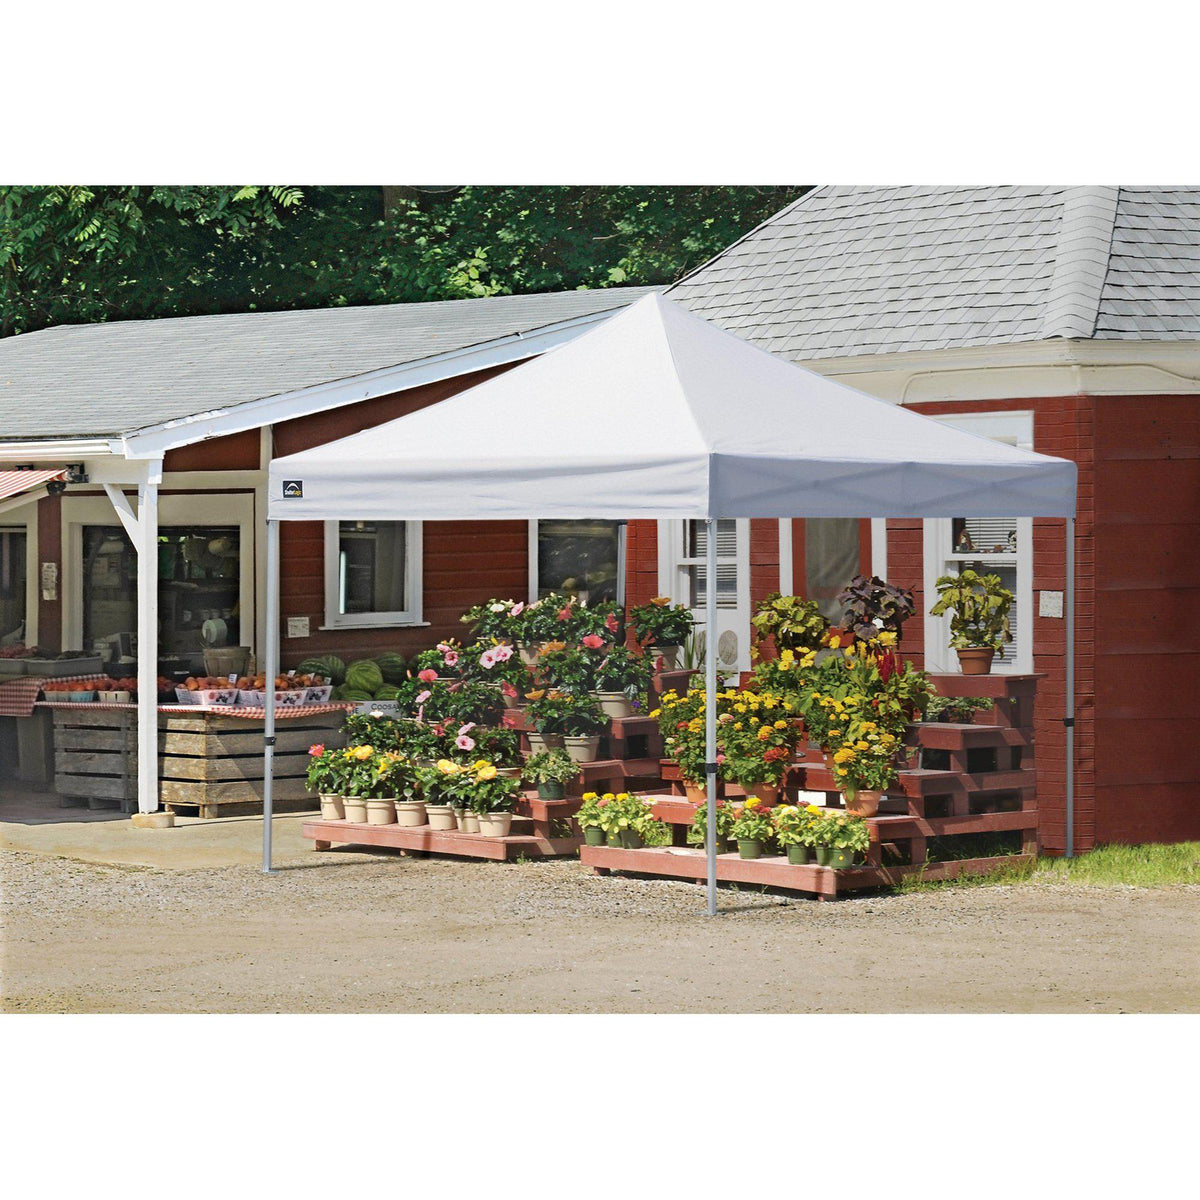 ShelterLogic Alumi-Max Pop-up Canopy with Roller Bag, White, 10 x 10 ft.